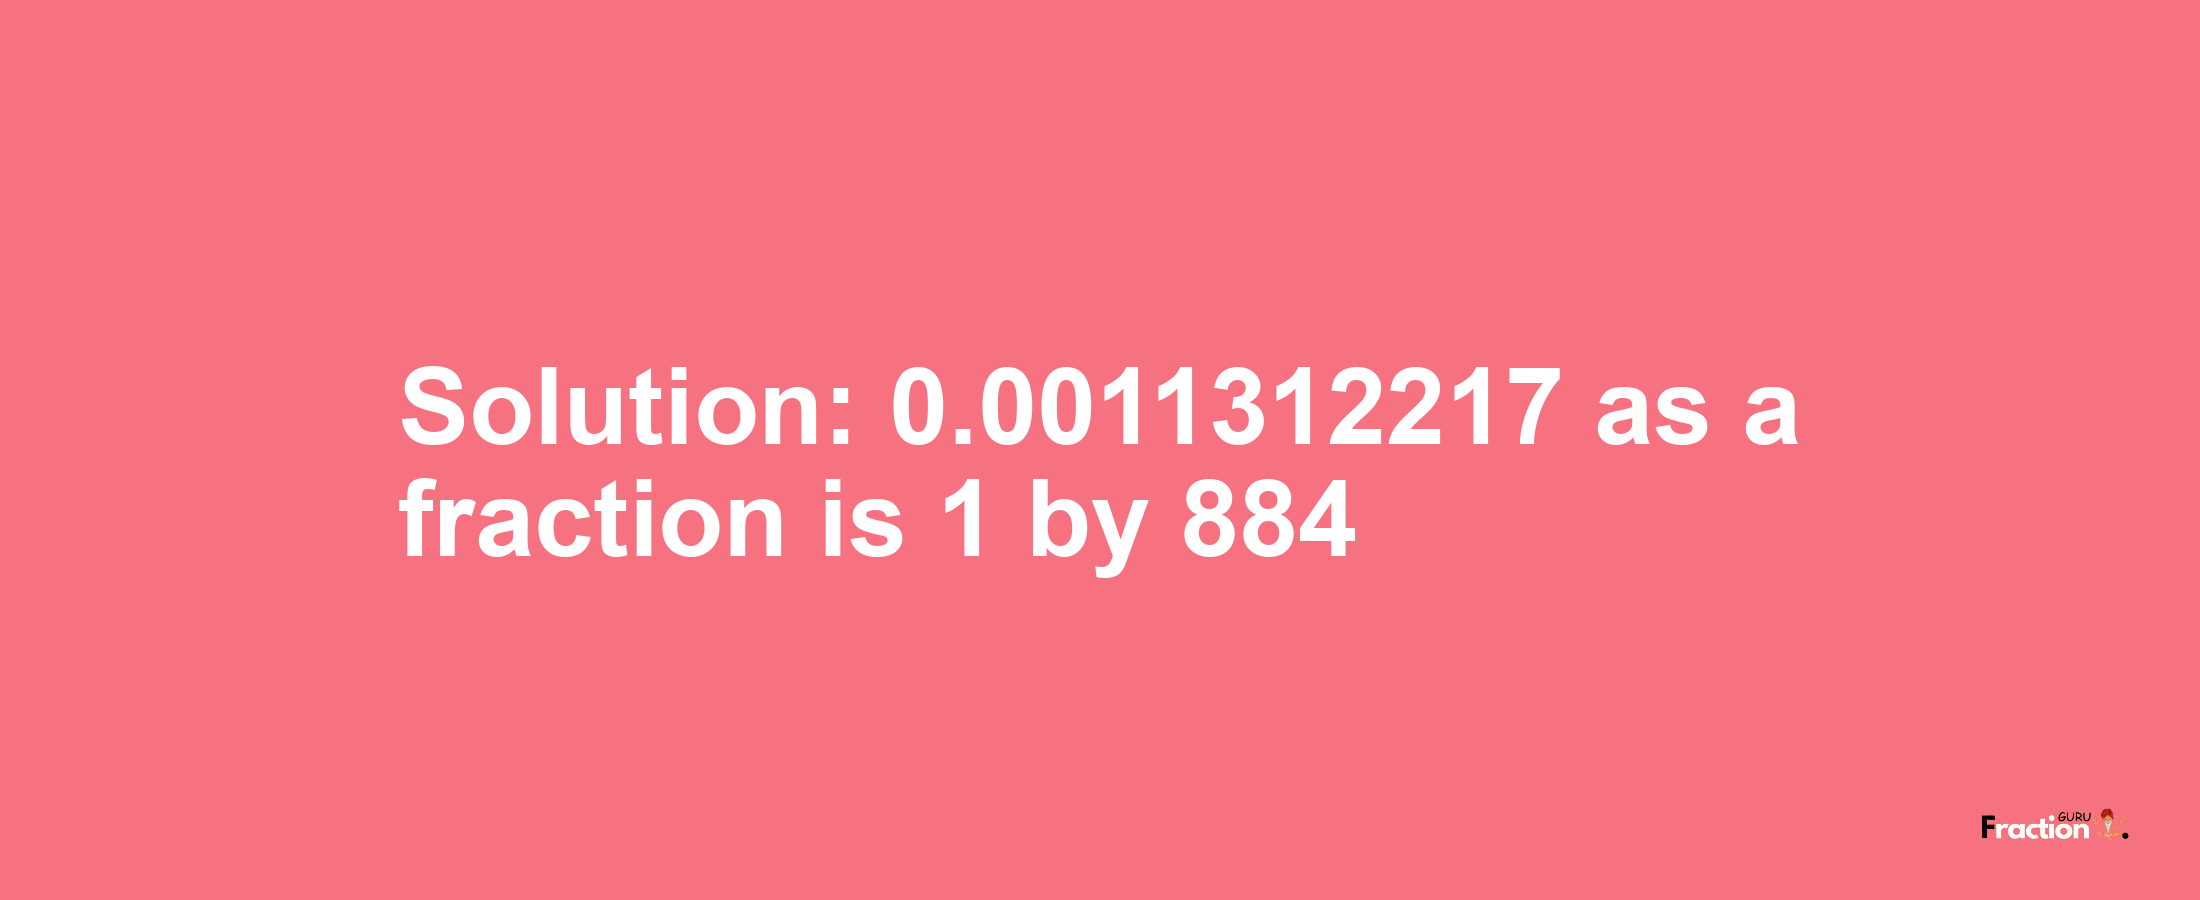 Solution:0.0011312217 as a fraction is 1/884